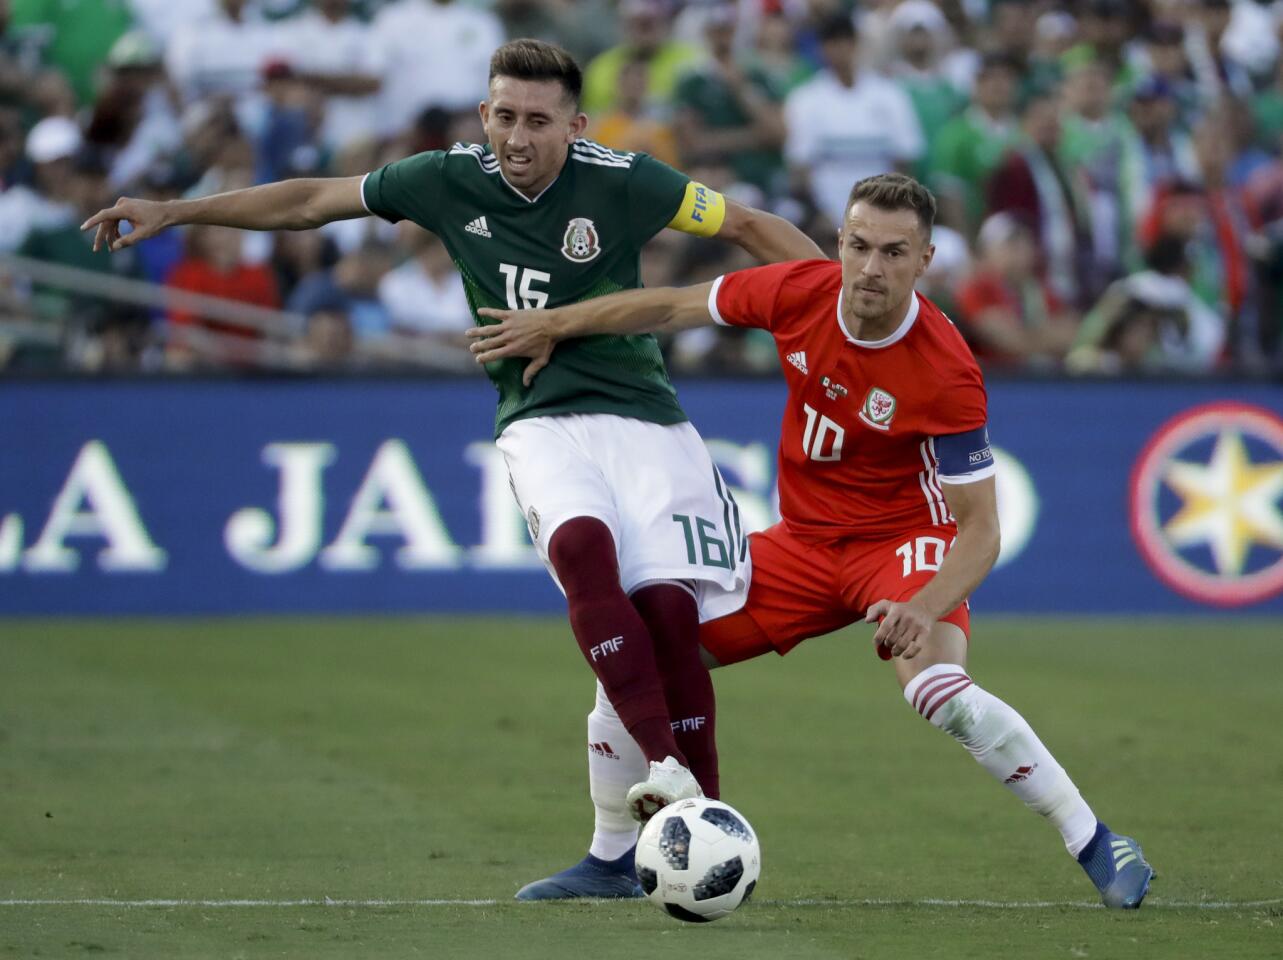 Wales' Tom Lockyer, right, pushes Mexico's Hector Herrera during the first half of their soccer match, Monday, May 28, 2018, in Pasadena, Calif. (AP Photo/Chris Carlson)